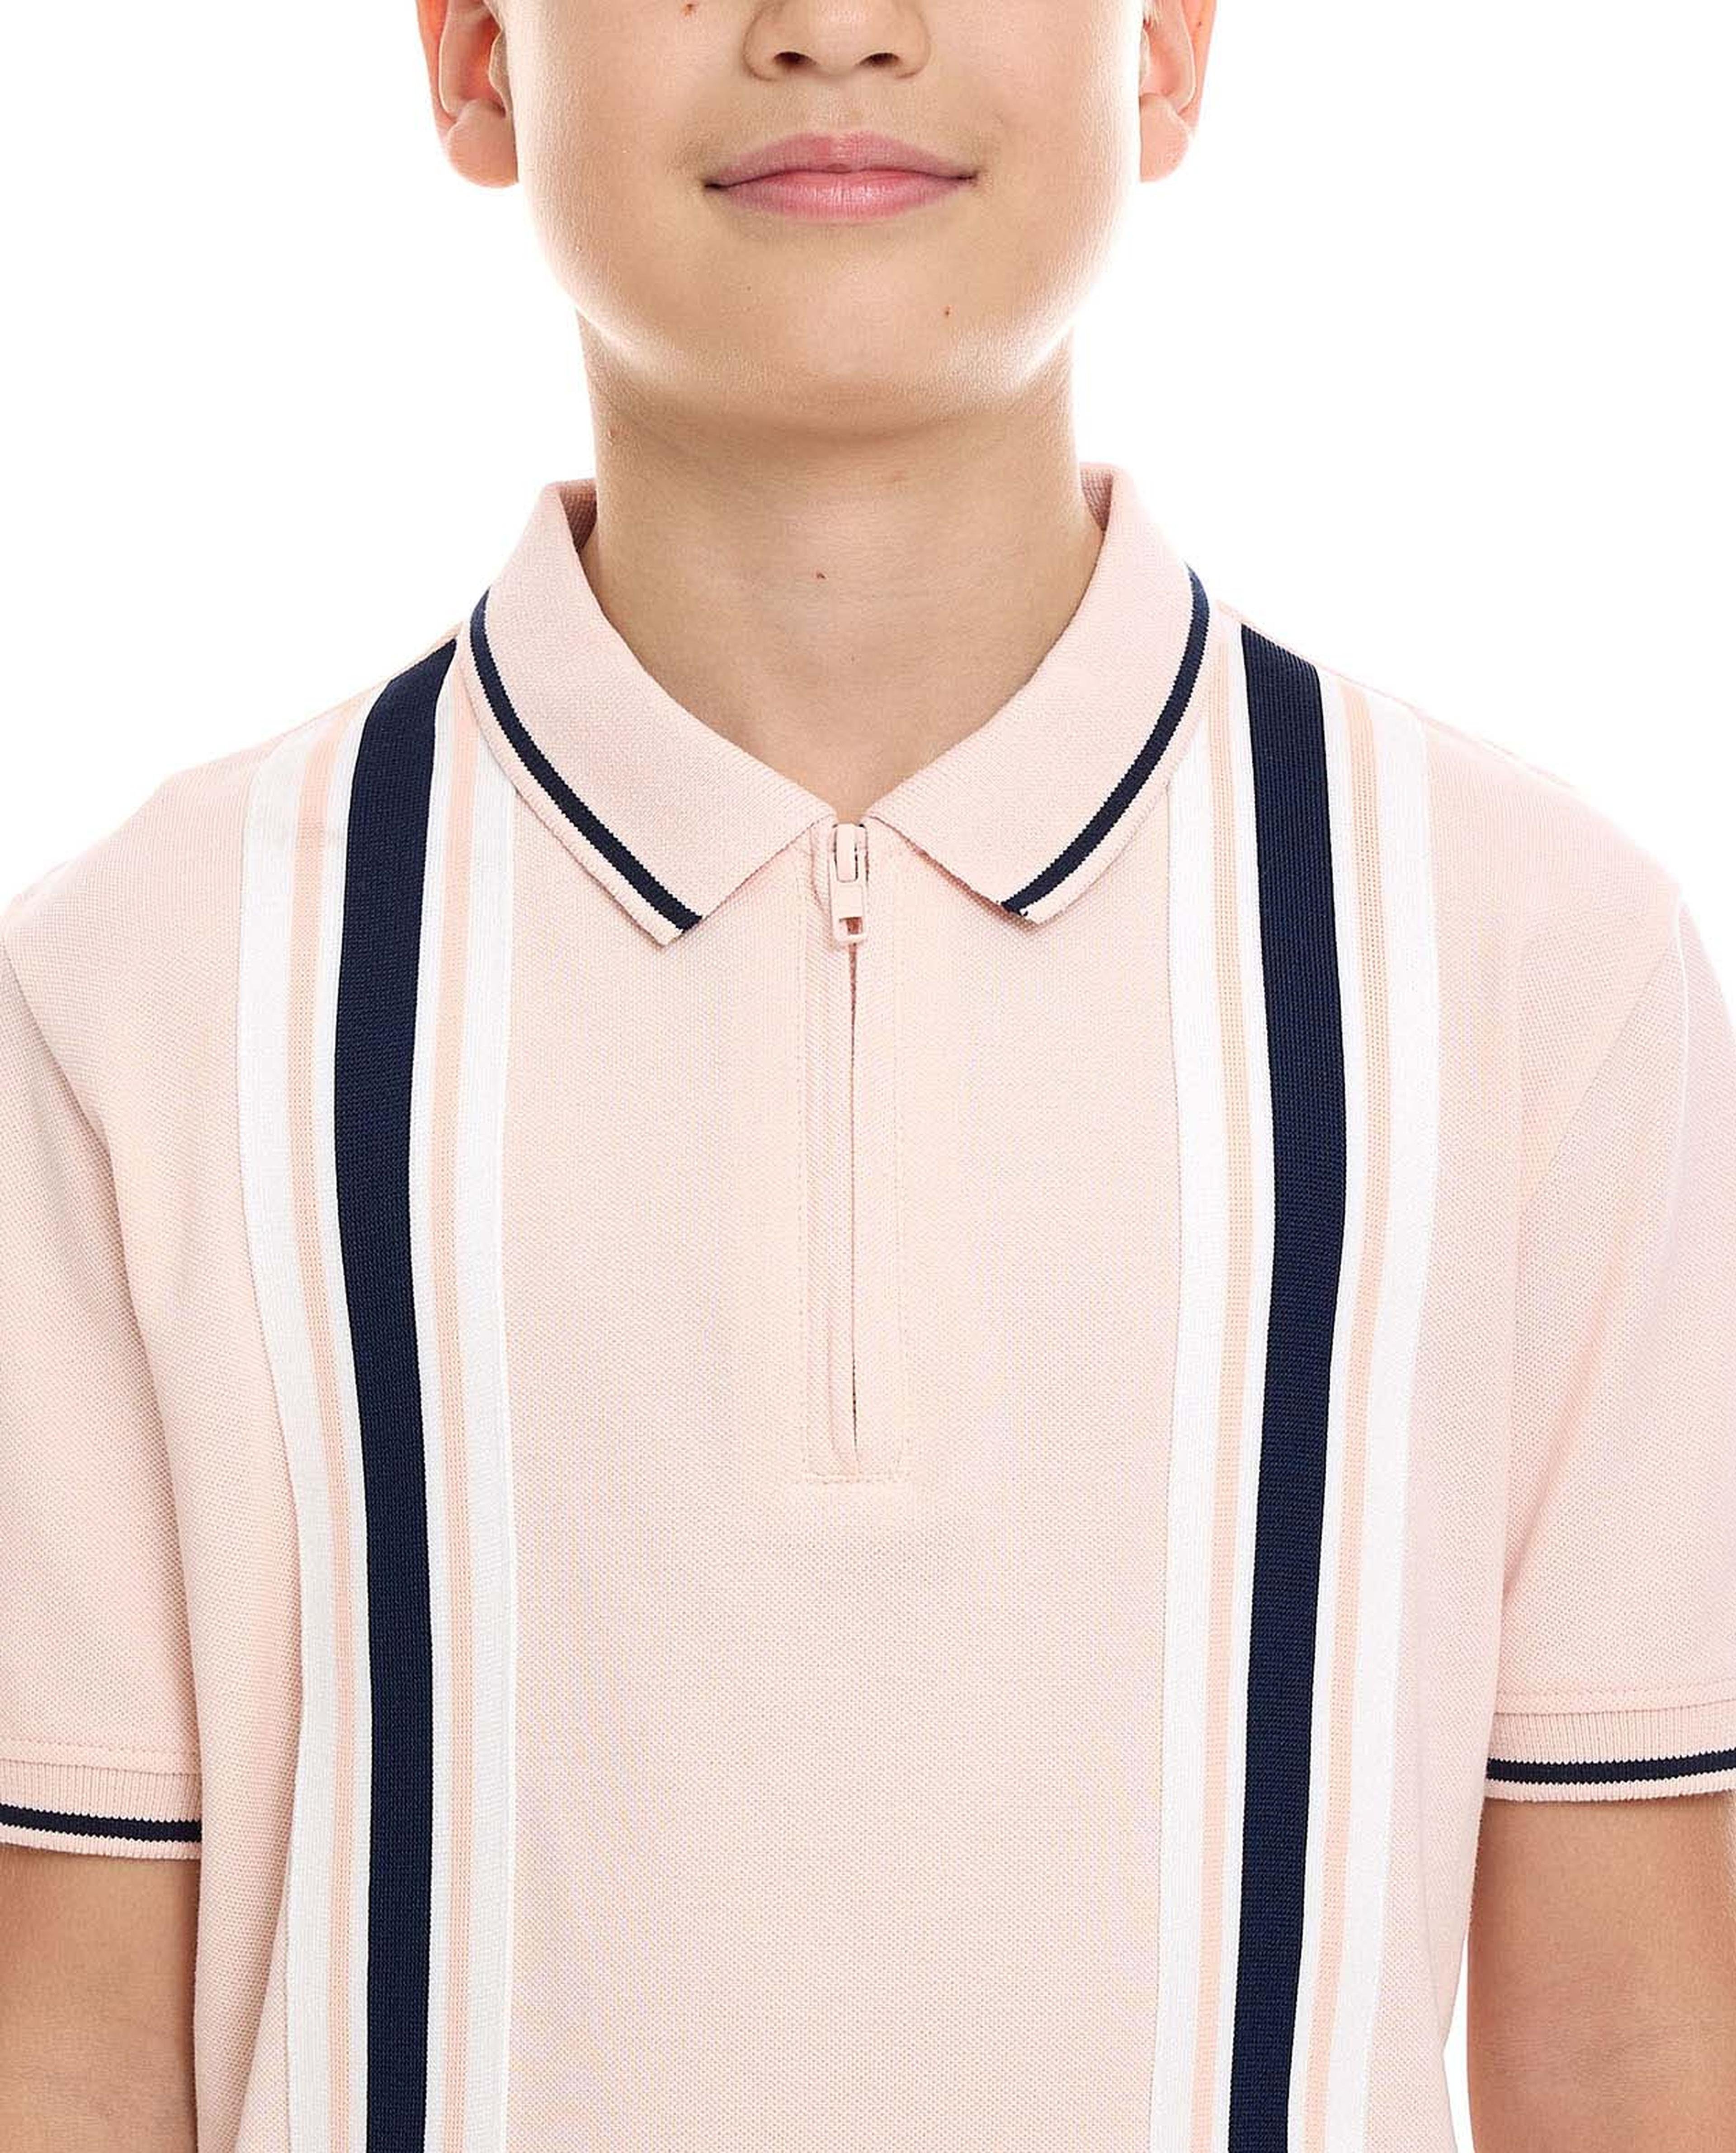 Striped Polo T-Shirt with Short Sleeves